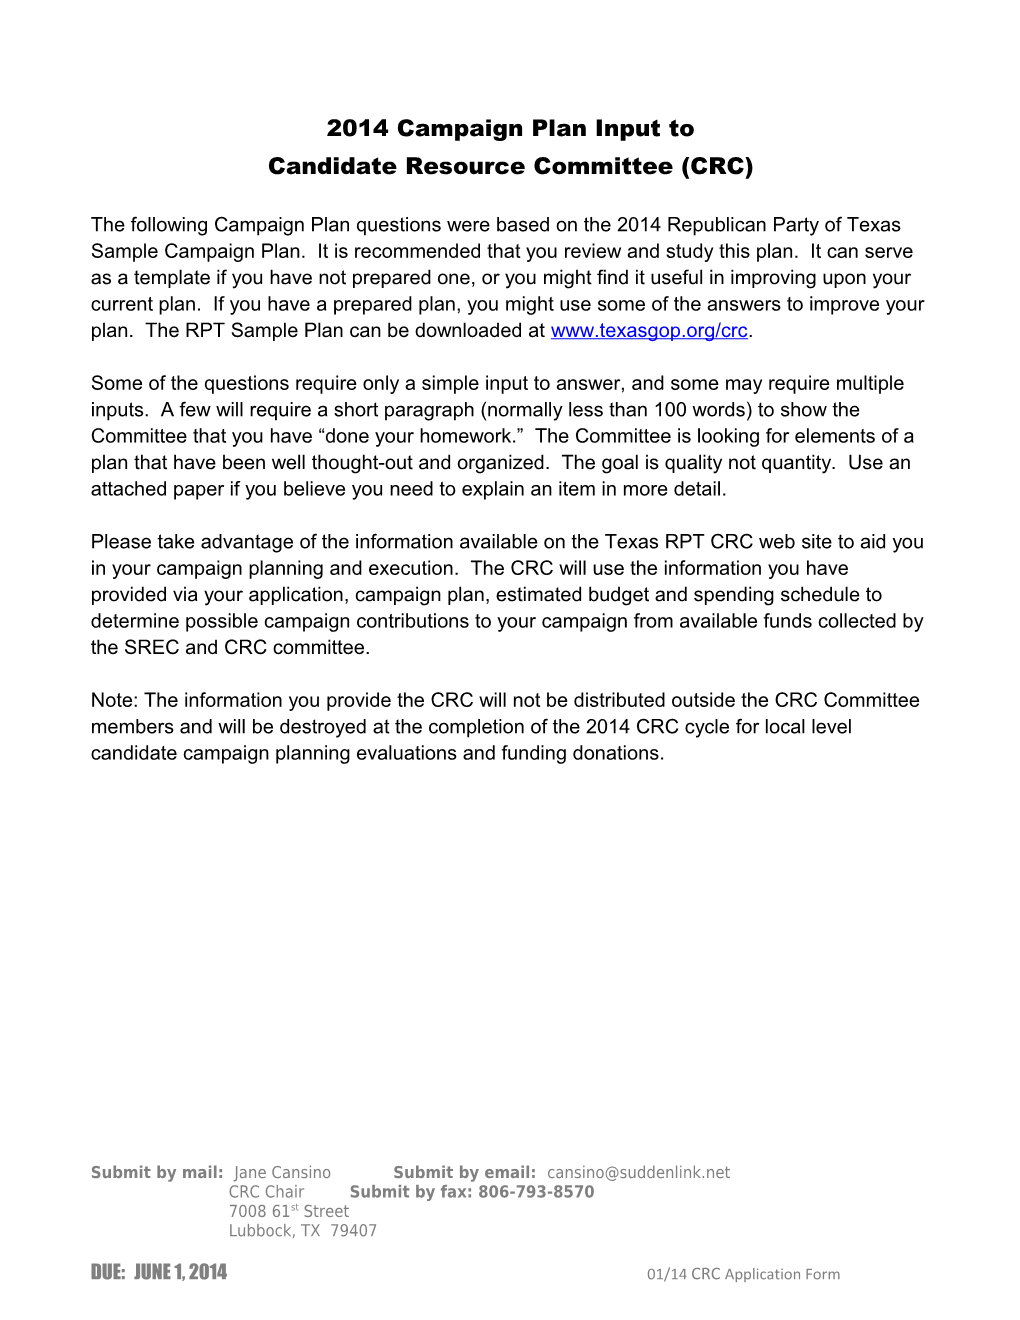 Candidate Resource Committee (CRC)